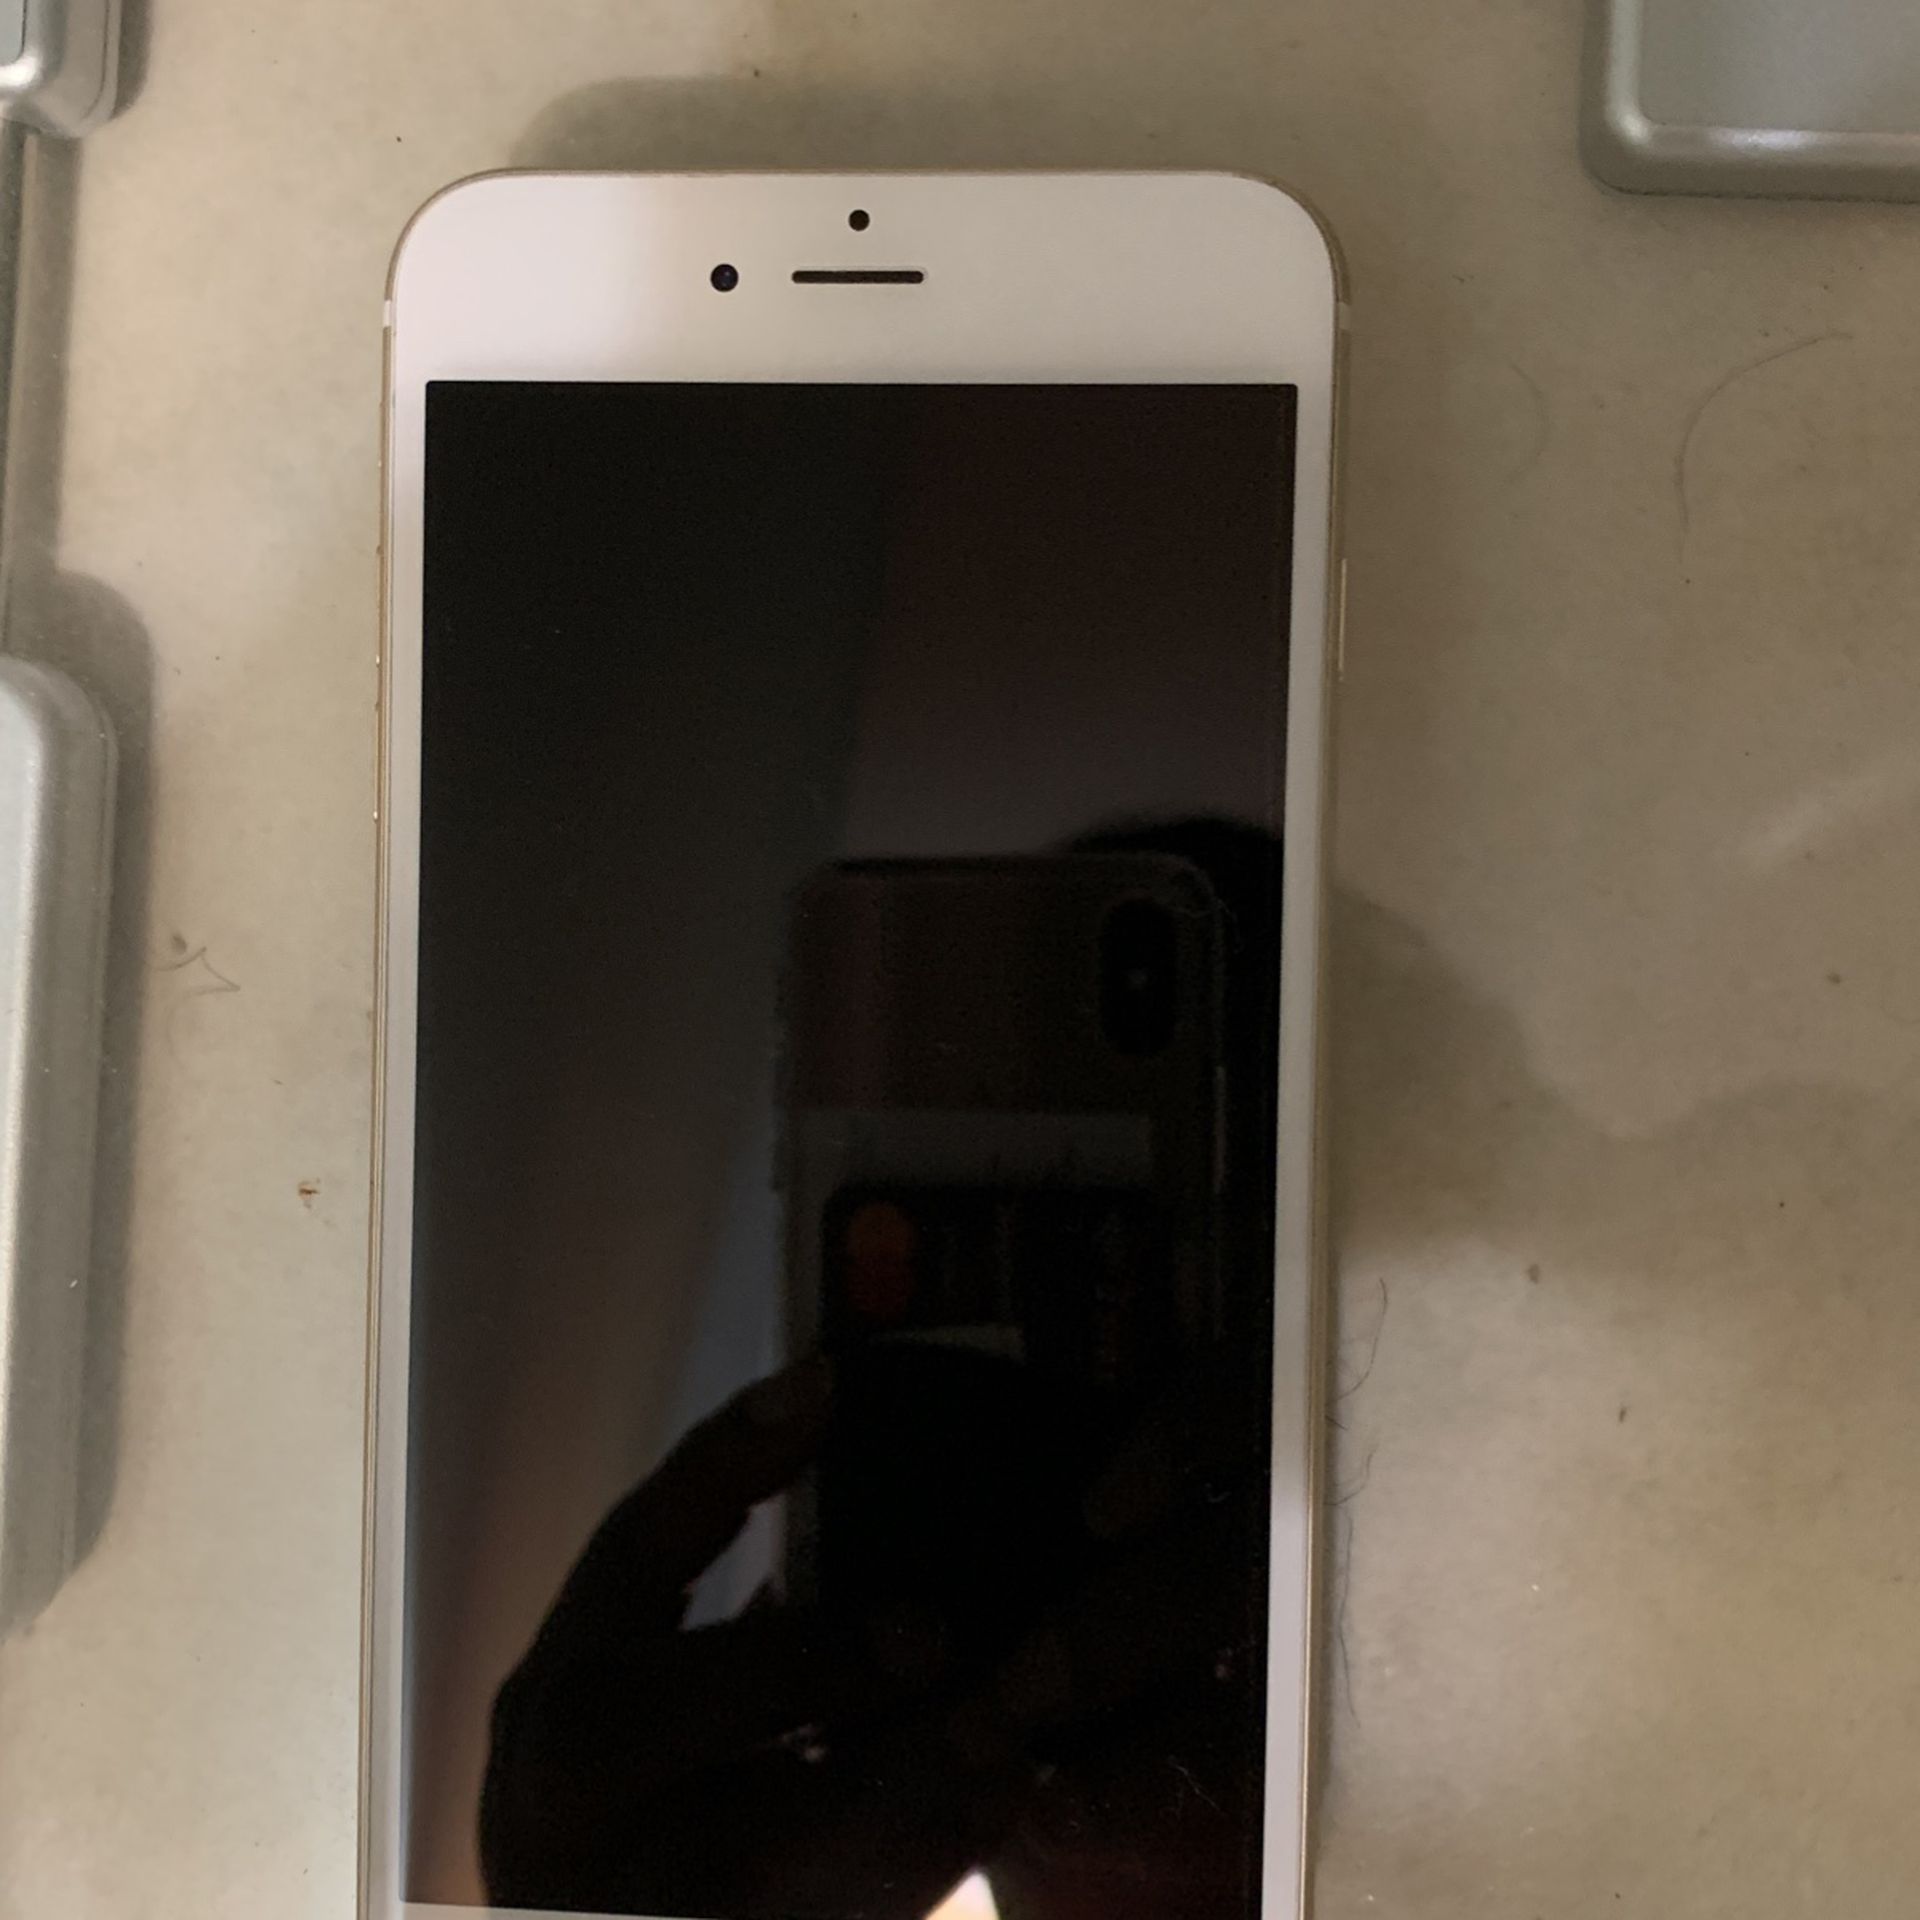 Unlocked iPhone 6 Plus, includes screen protector and case. Very Good Condition !